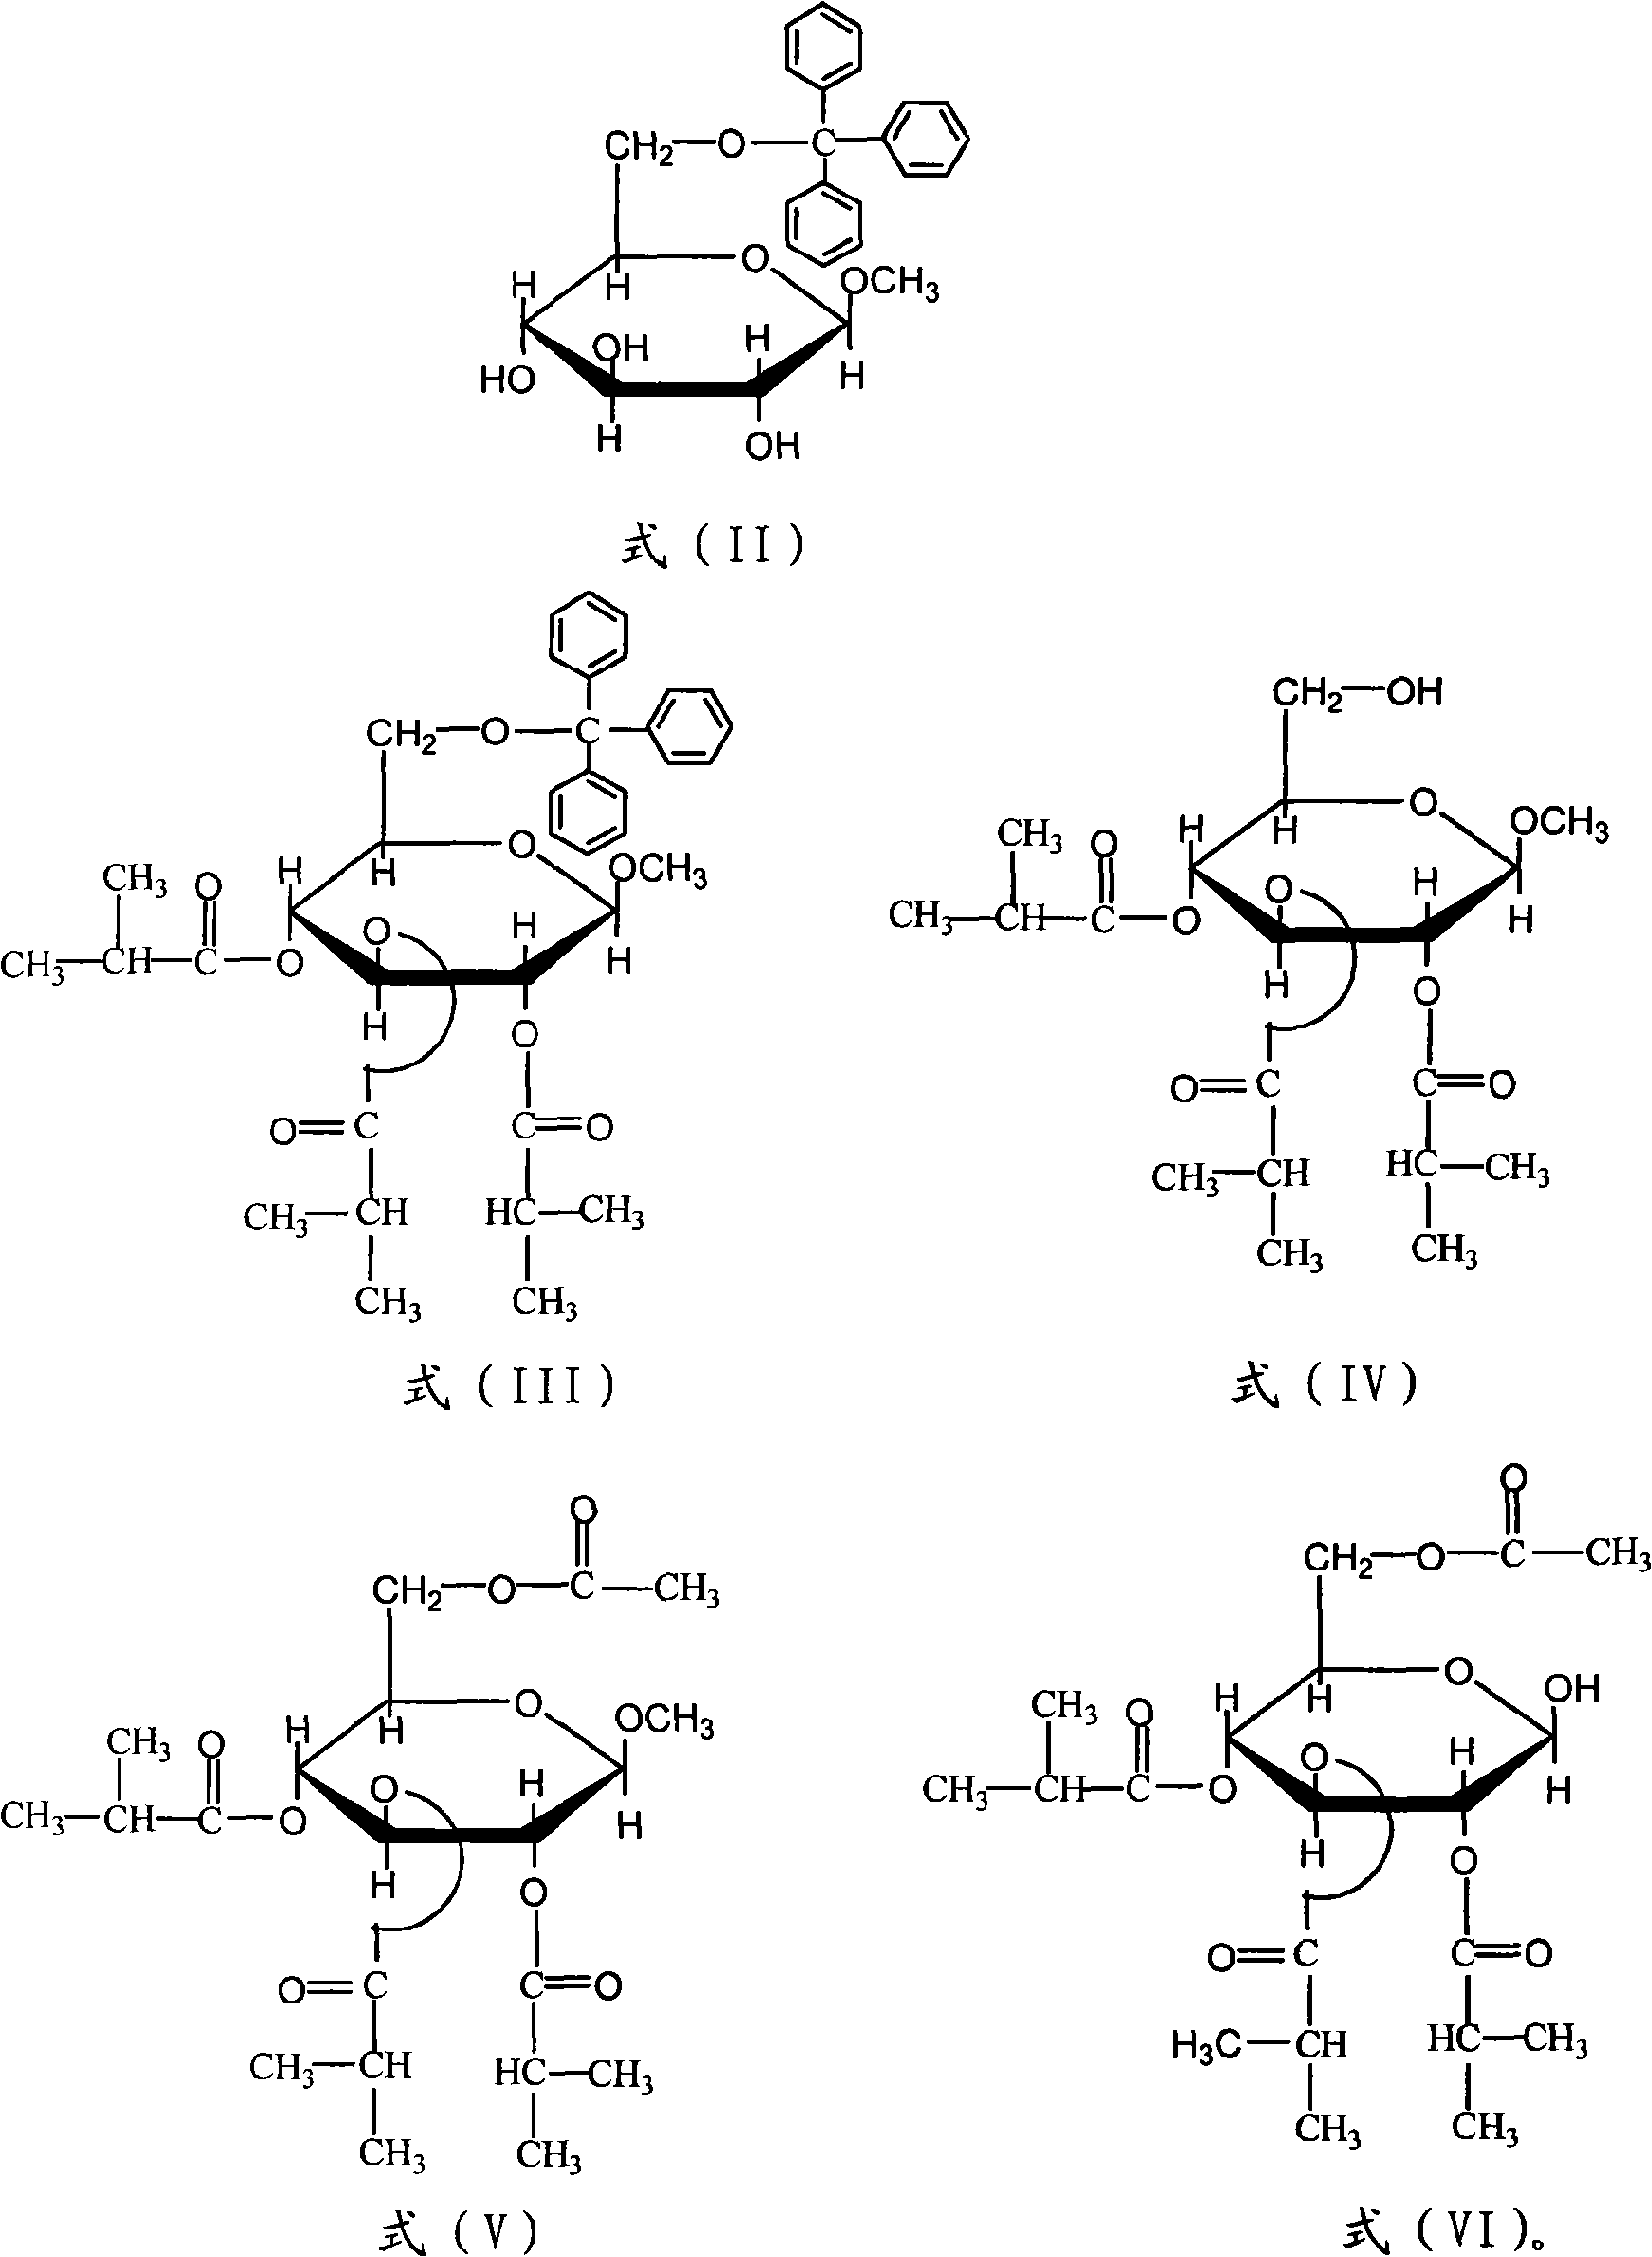 Synthesis method for glucose tetra-ester in tobacco